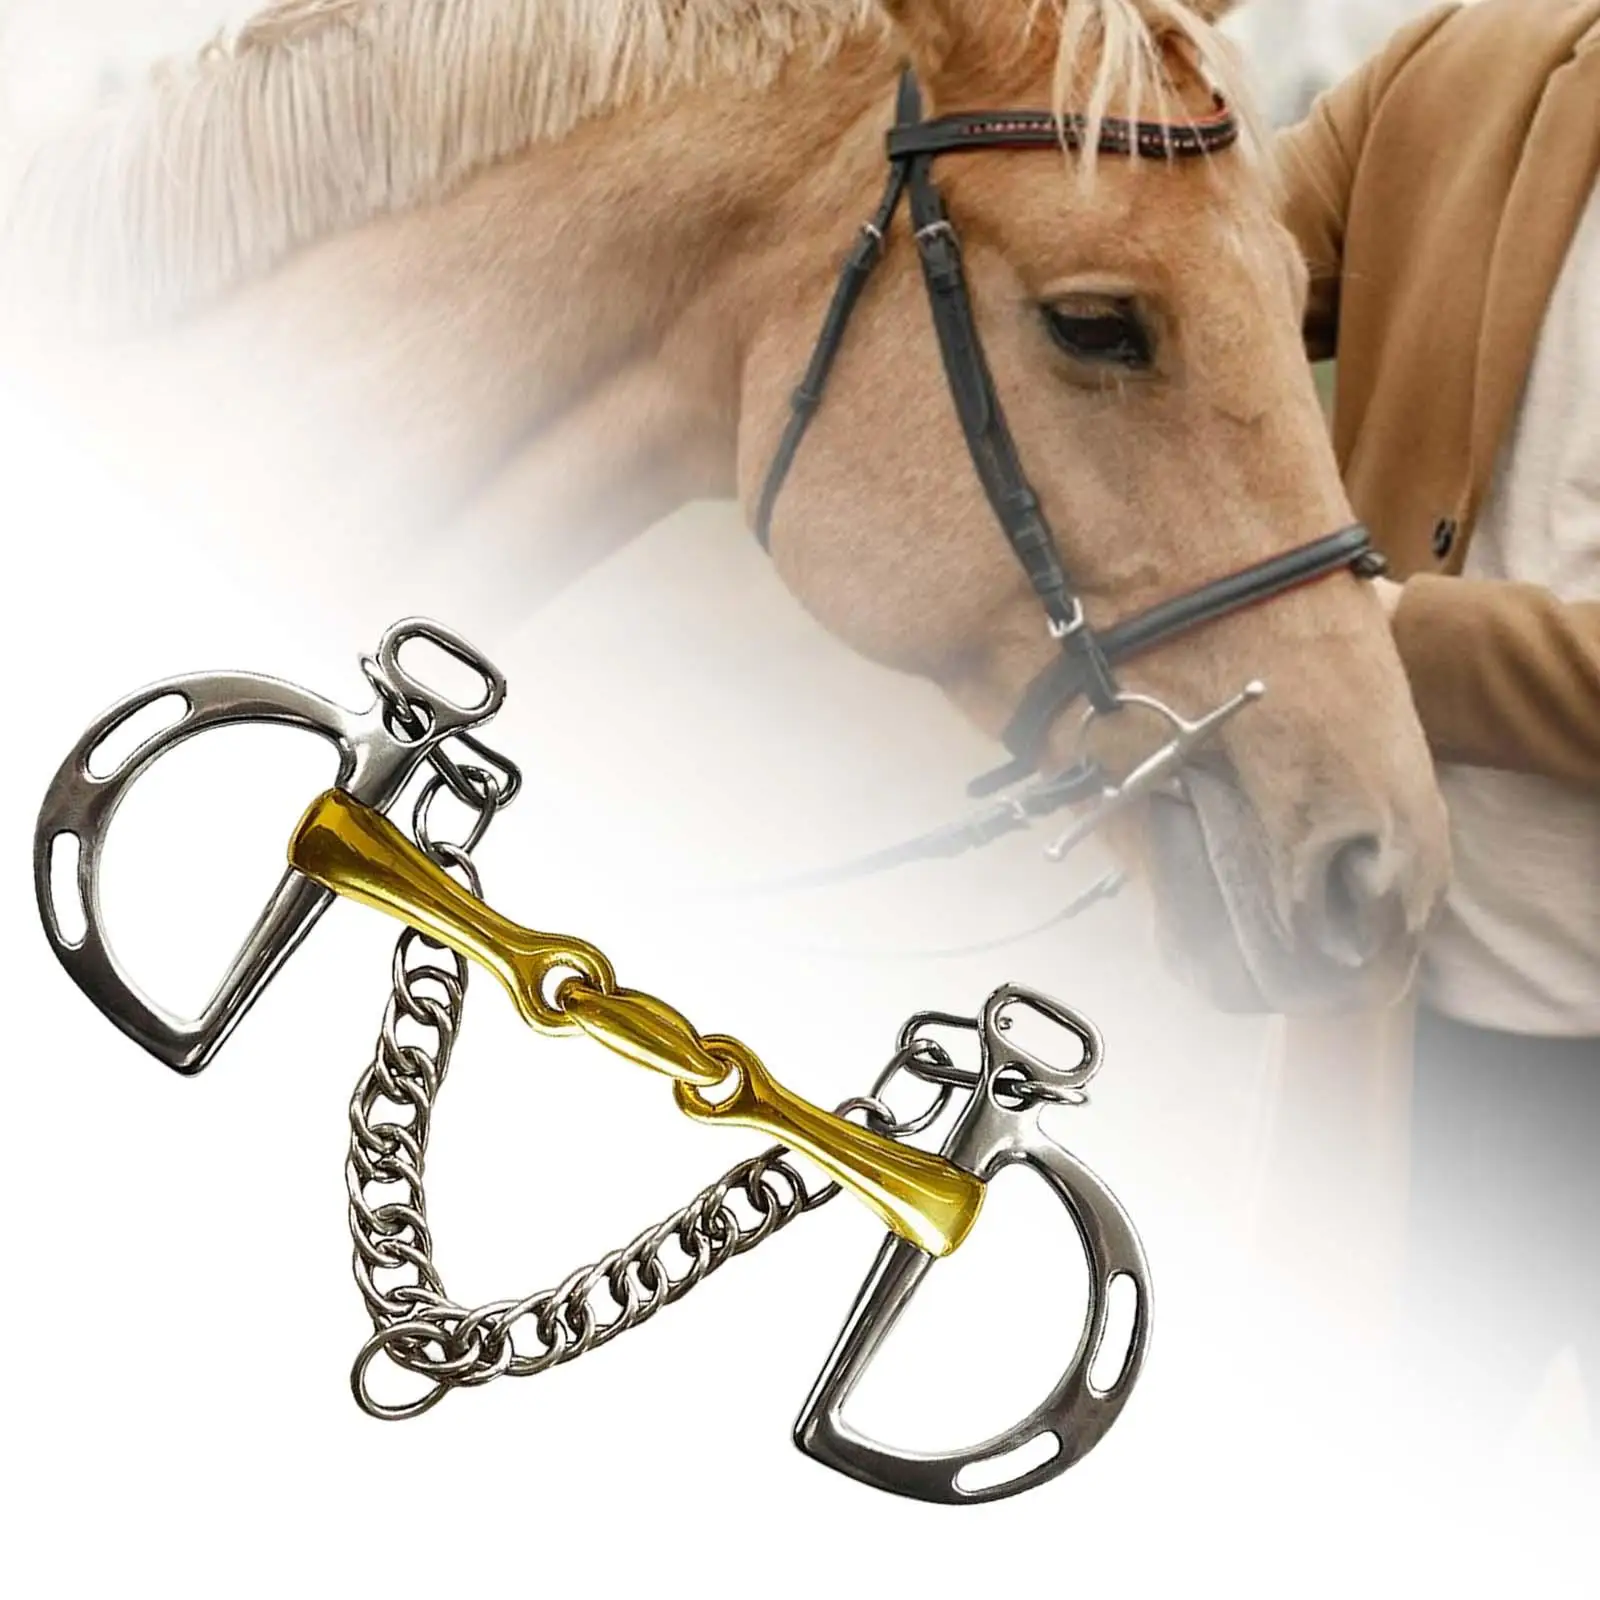 horse Bit Copper Mouth Center Roller with Silver Trims Cheek Harness for Horse